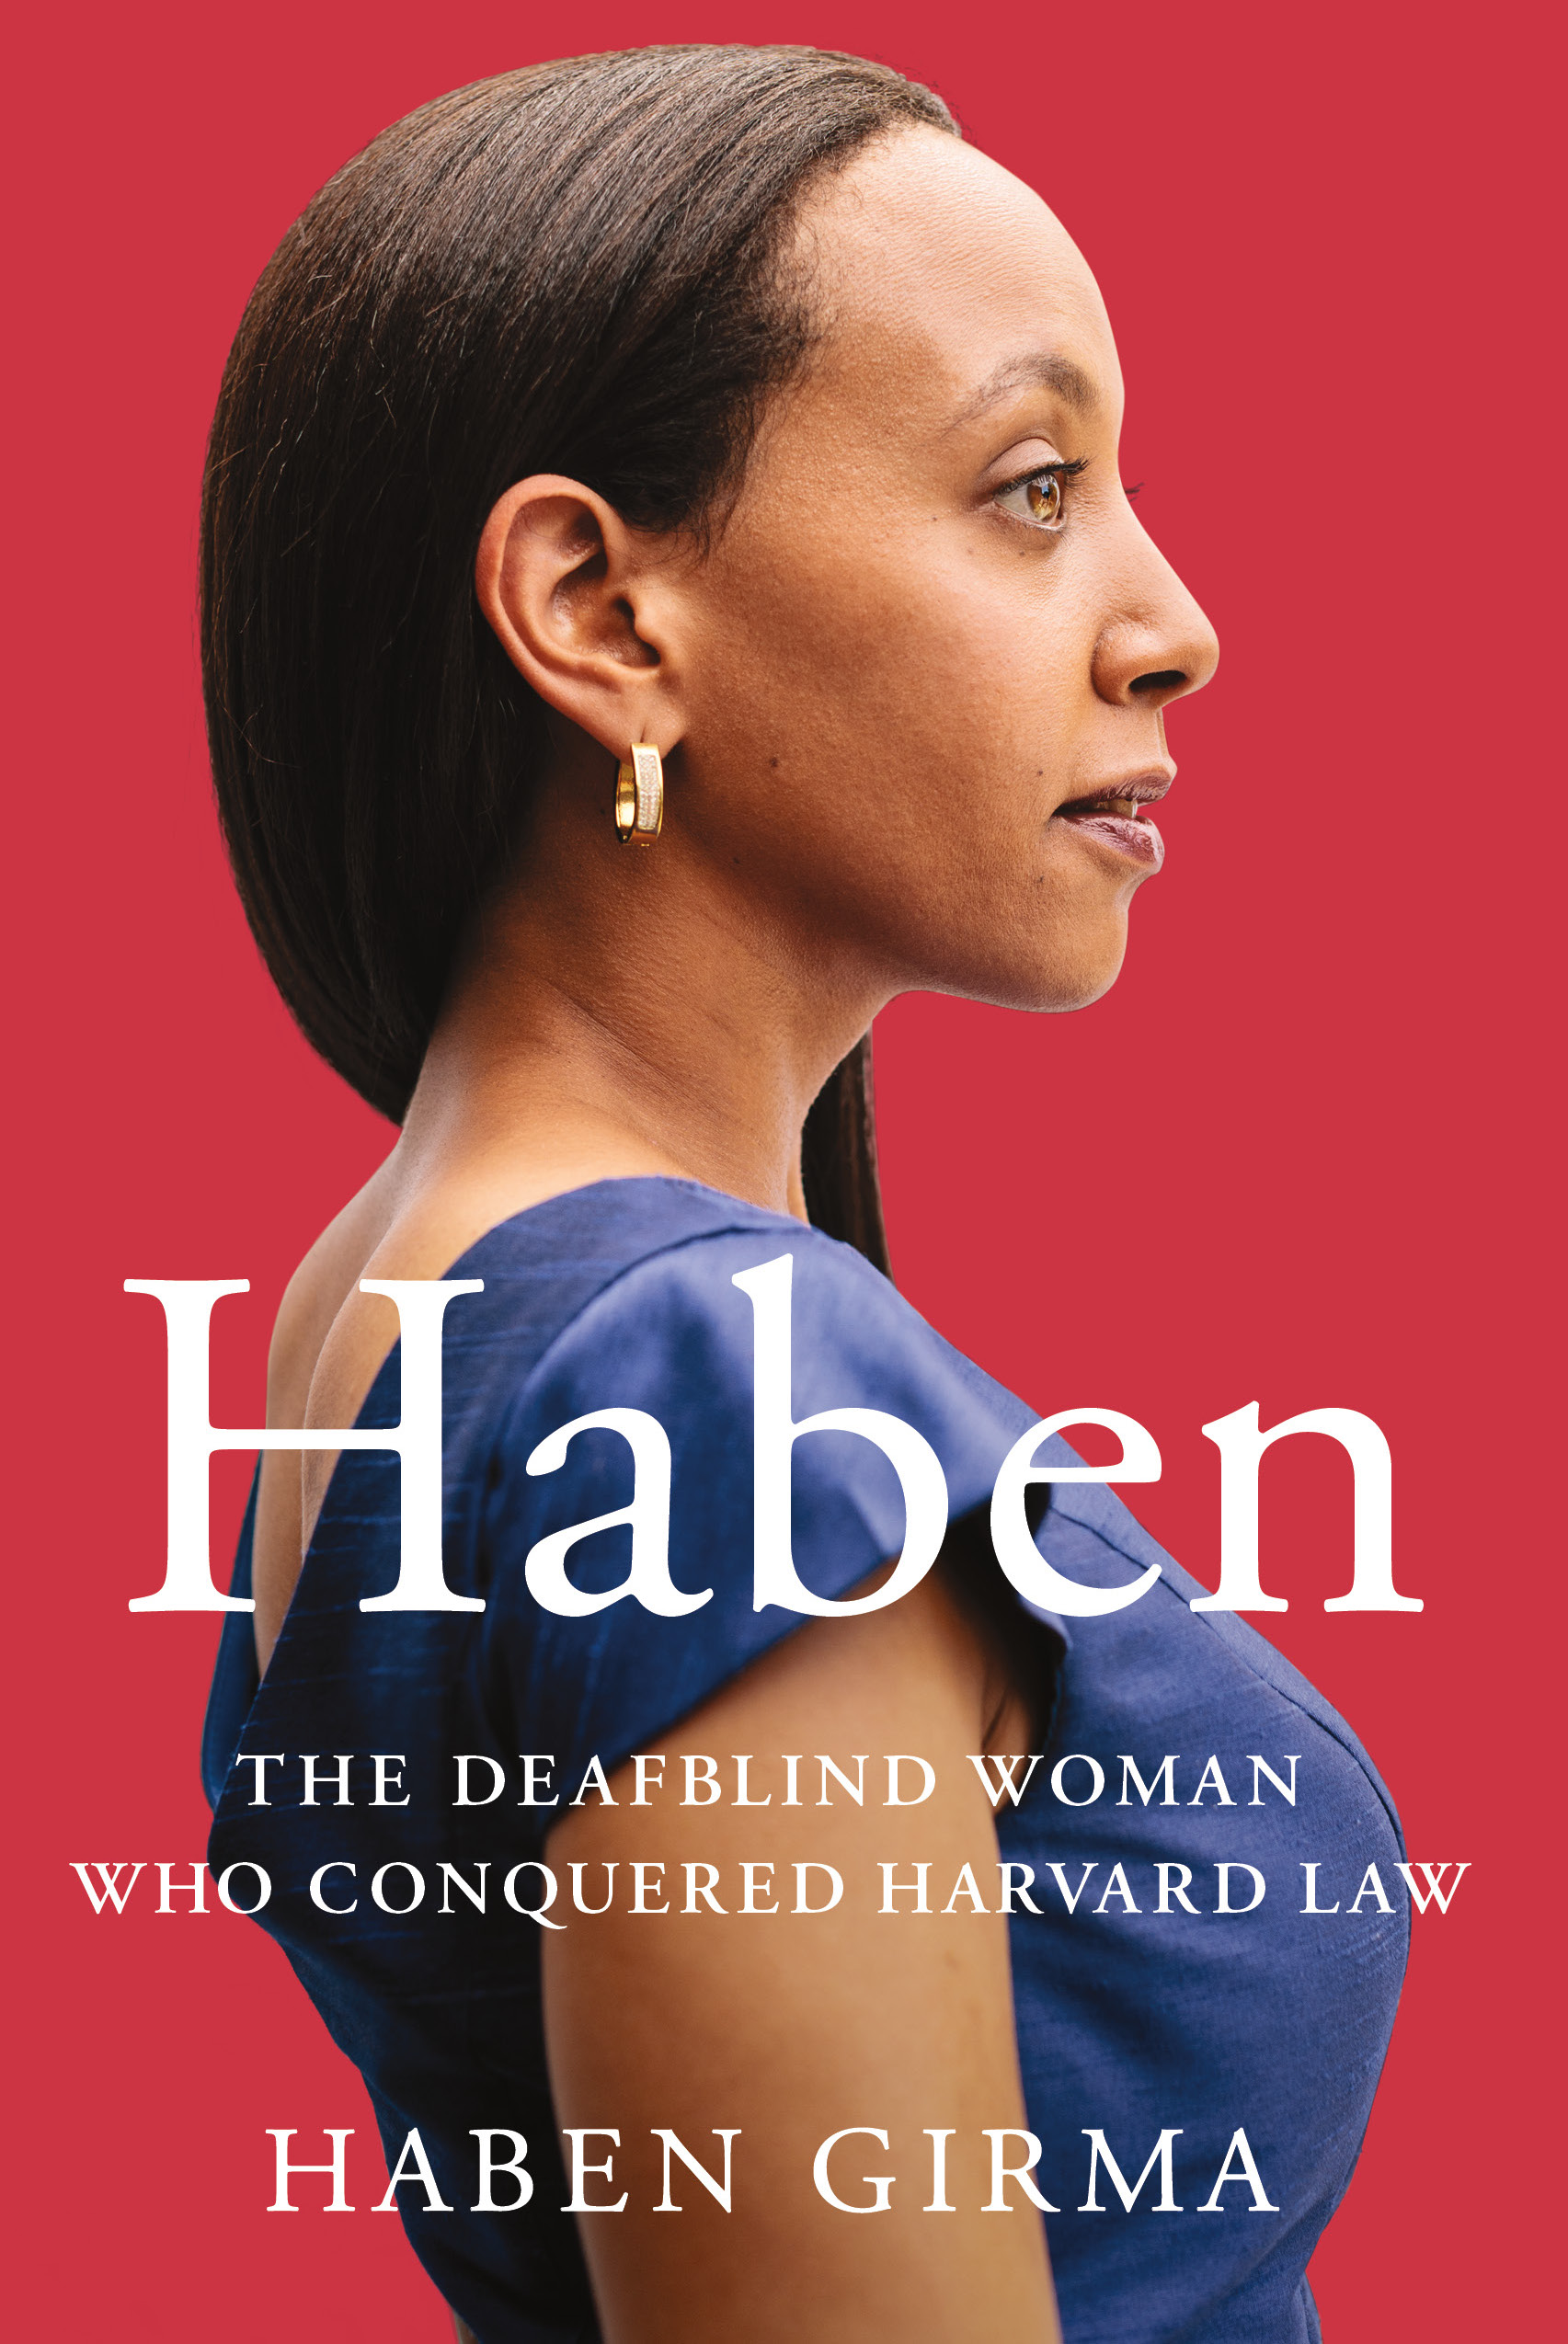 book cover with red background and woman in profile